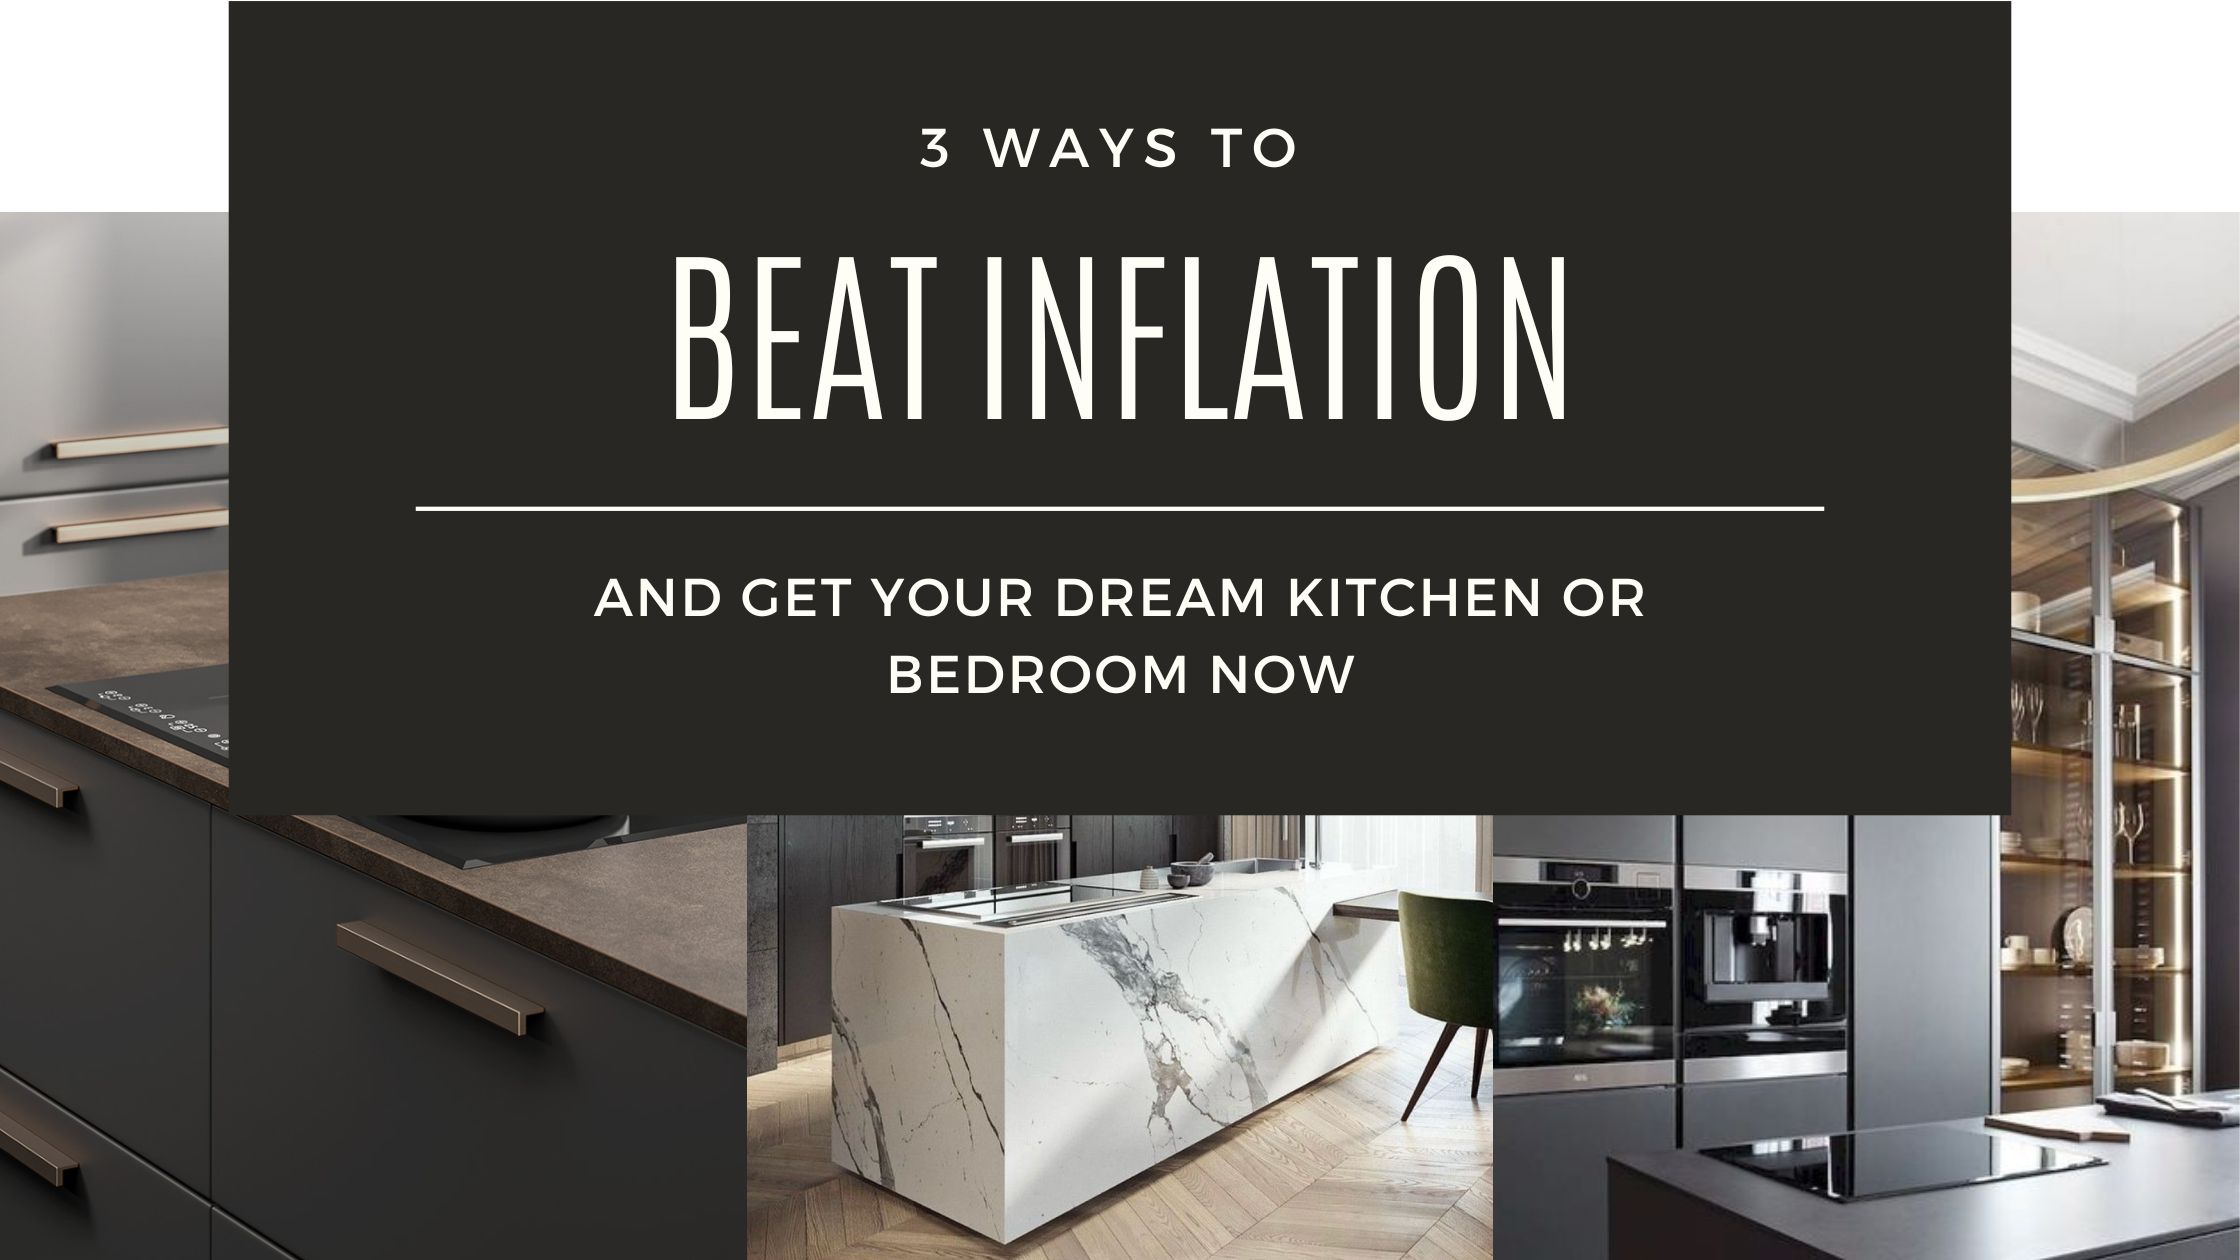 Beat inflation